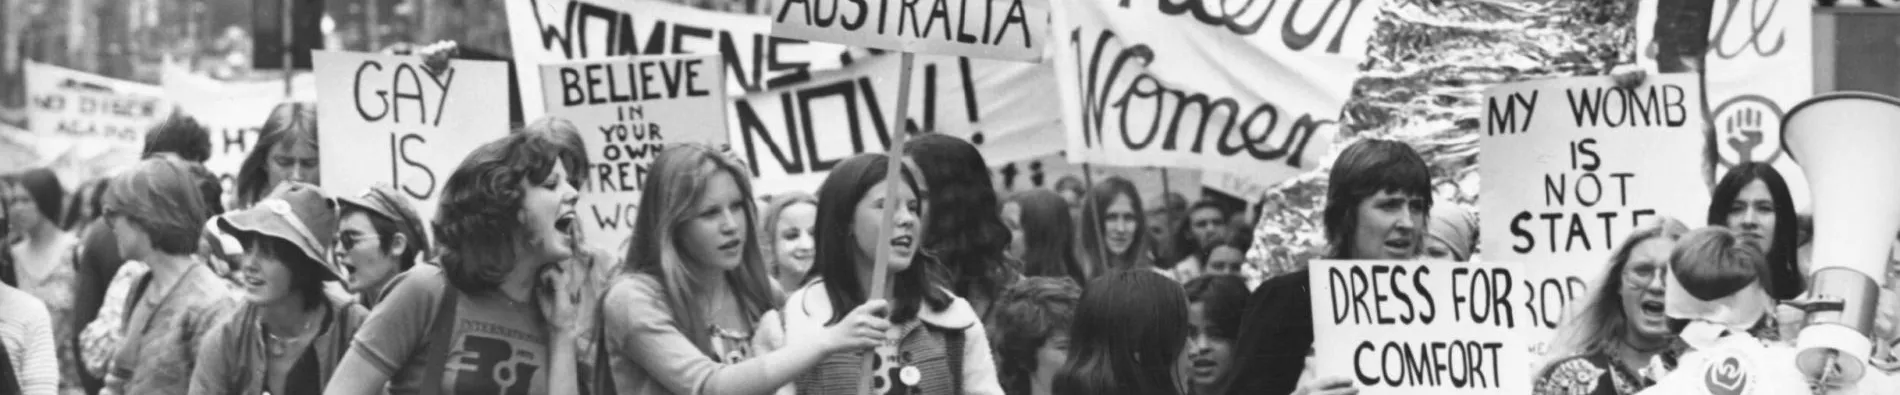 A black and white photo of a group of women holding protest signs in 1975. Signs say 'sexism is alive and well in Australia' and 'dress for comfort not style'.